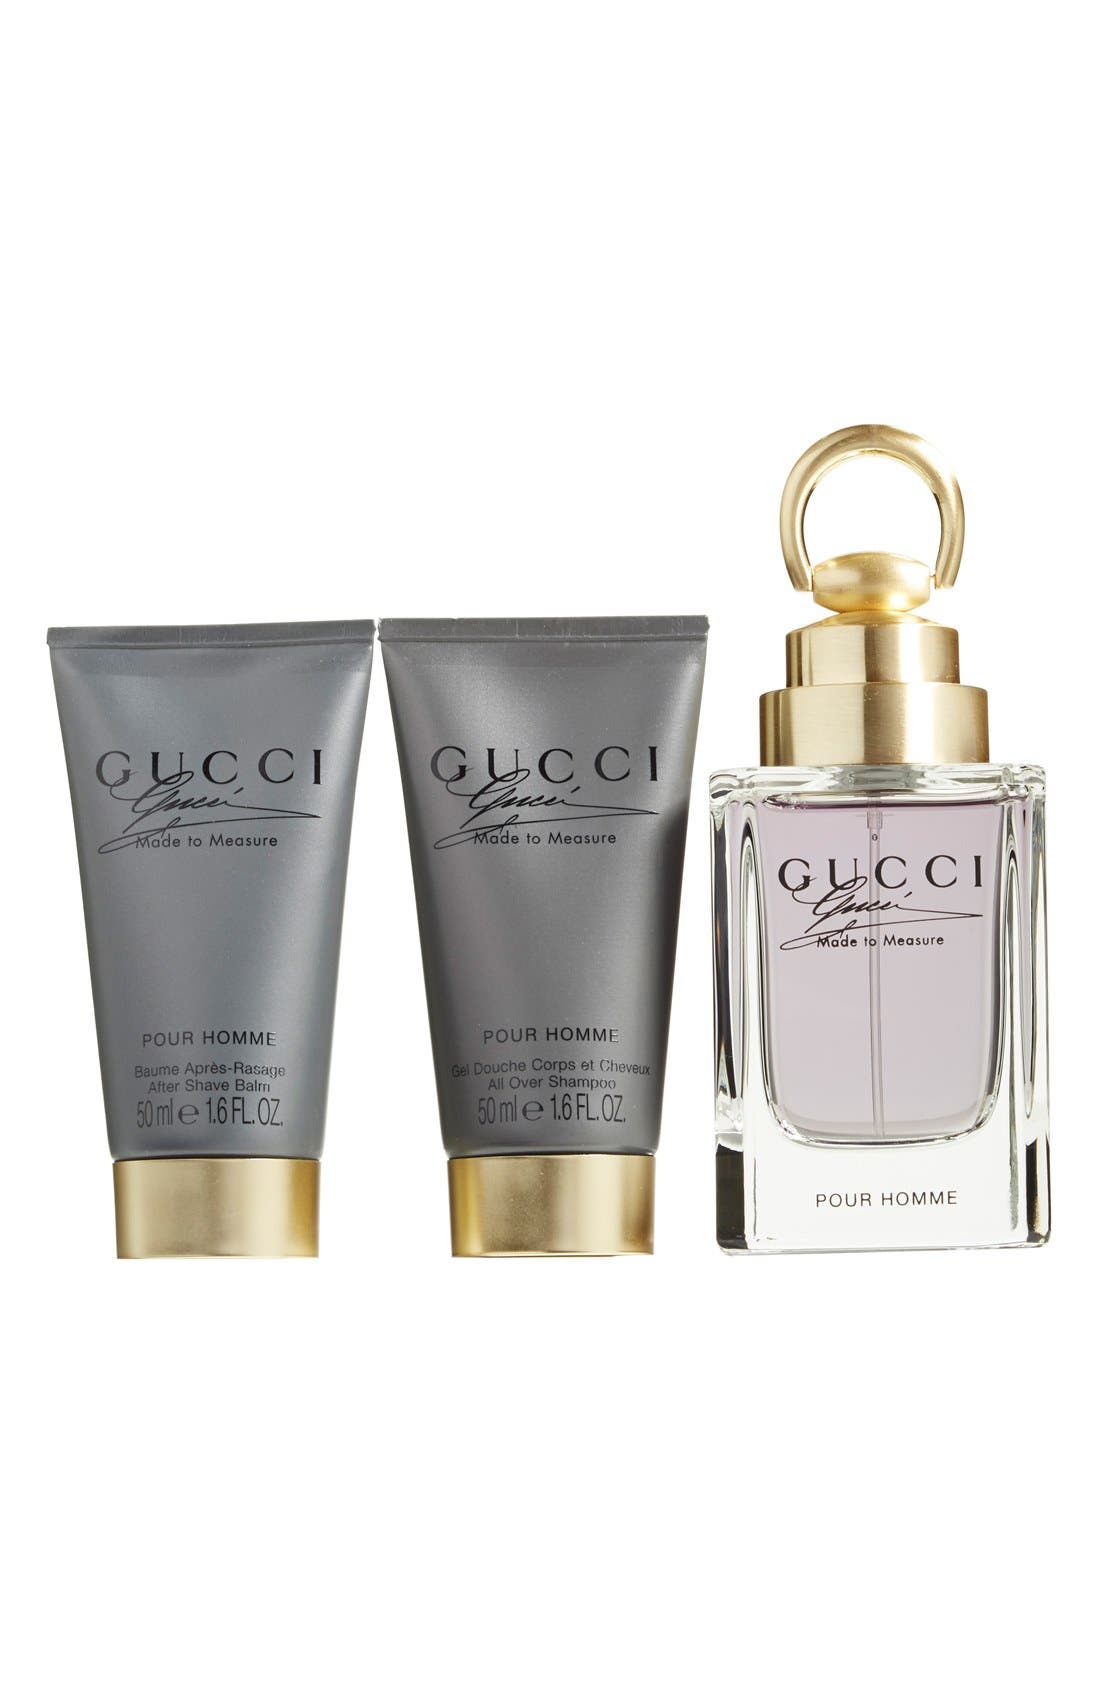 gucci made to measure gift set